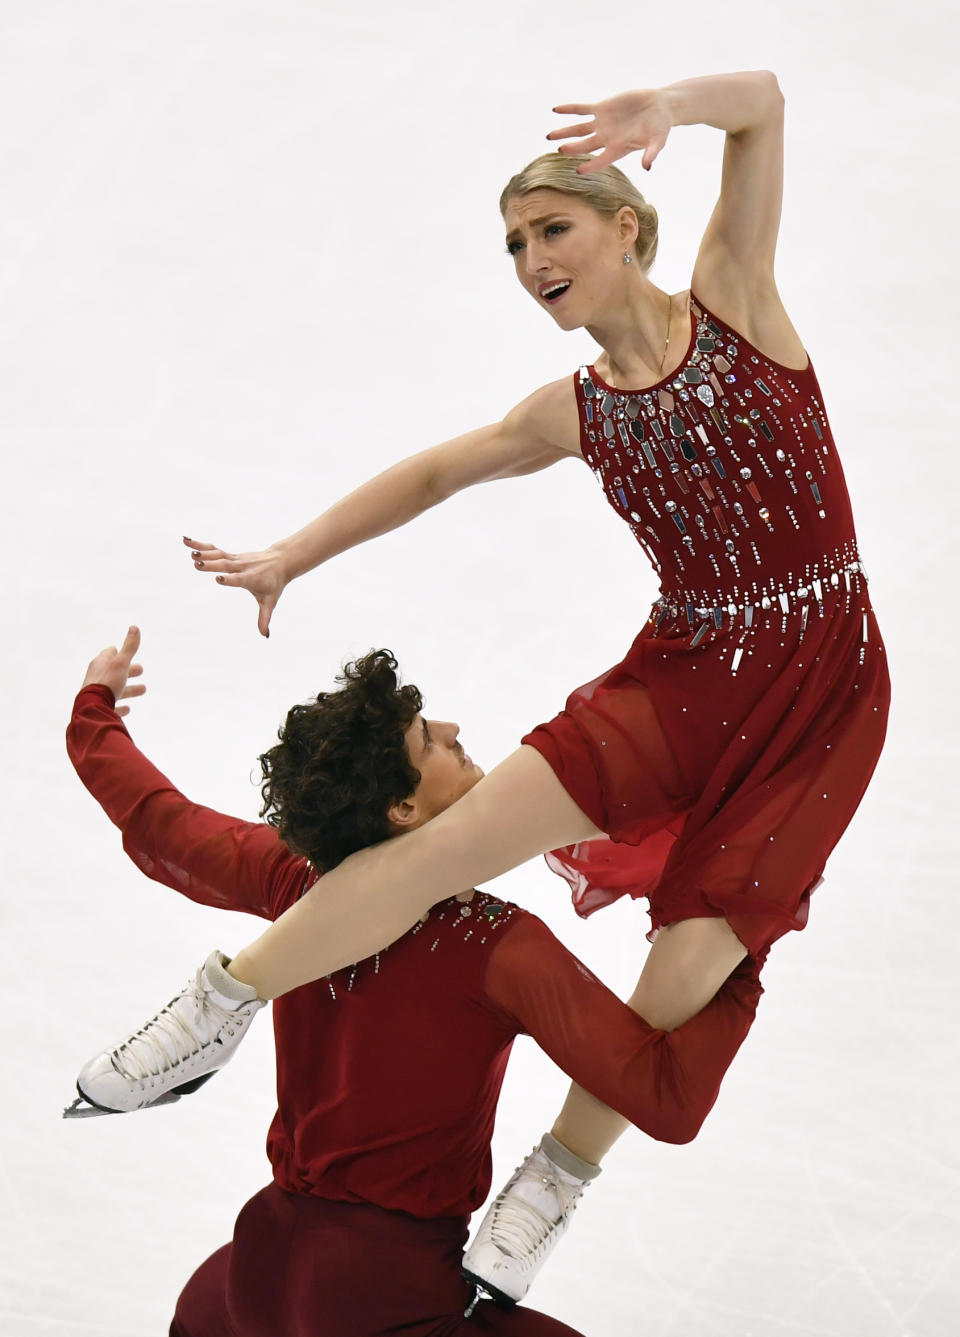 Piper Gilles and Paul Poirier of Canada perform during the Ice Dance-Free Dance at the Figure Skating World Championships in Stockholm, Sweden, Saturday, March 27, 2021. (AP Photo/Martin Meissner)